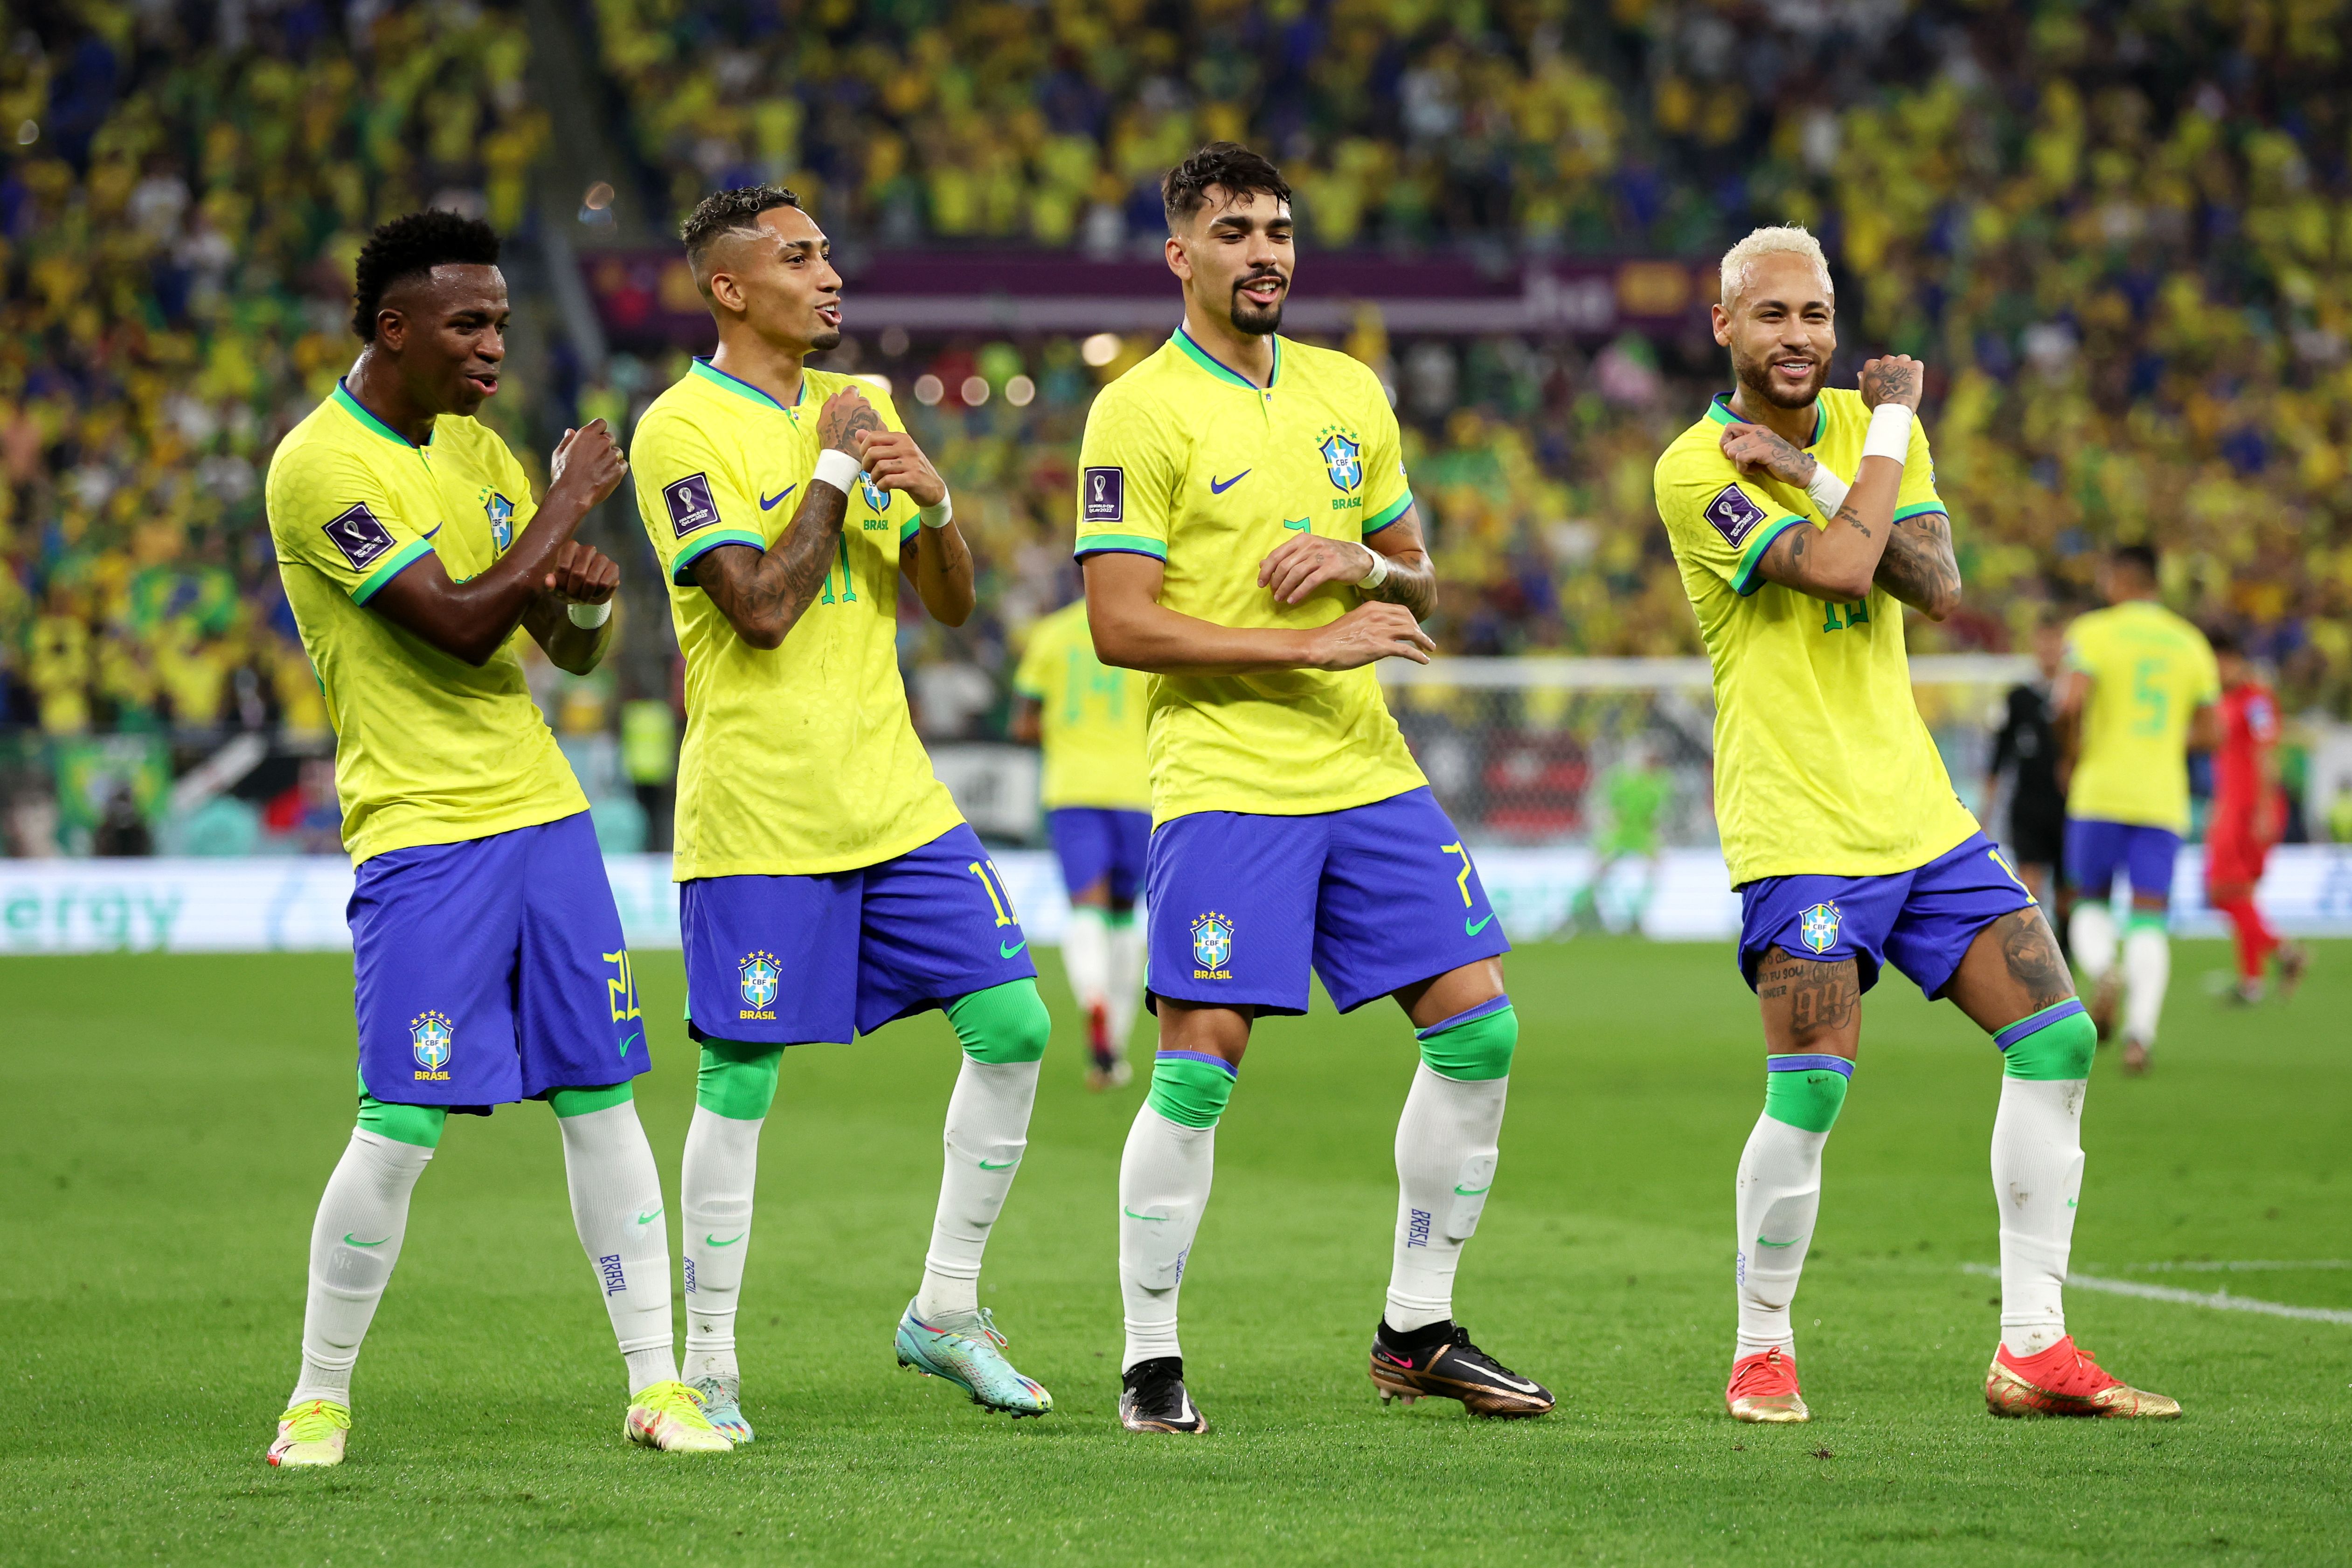 Brazil players dancing at the 2022 World Cup